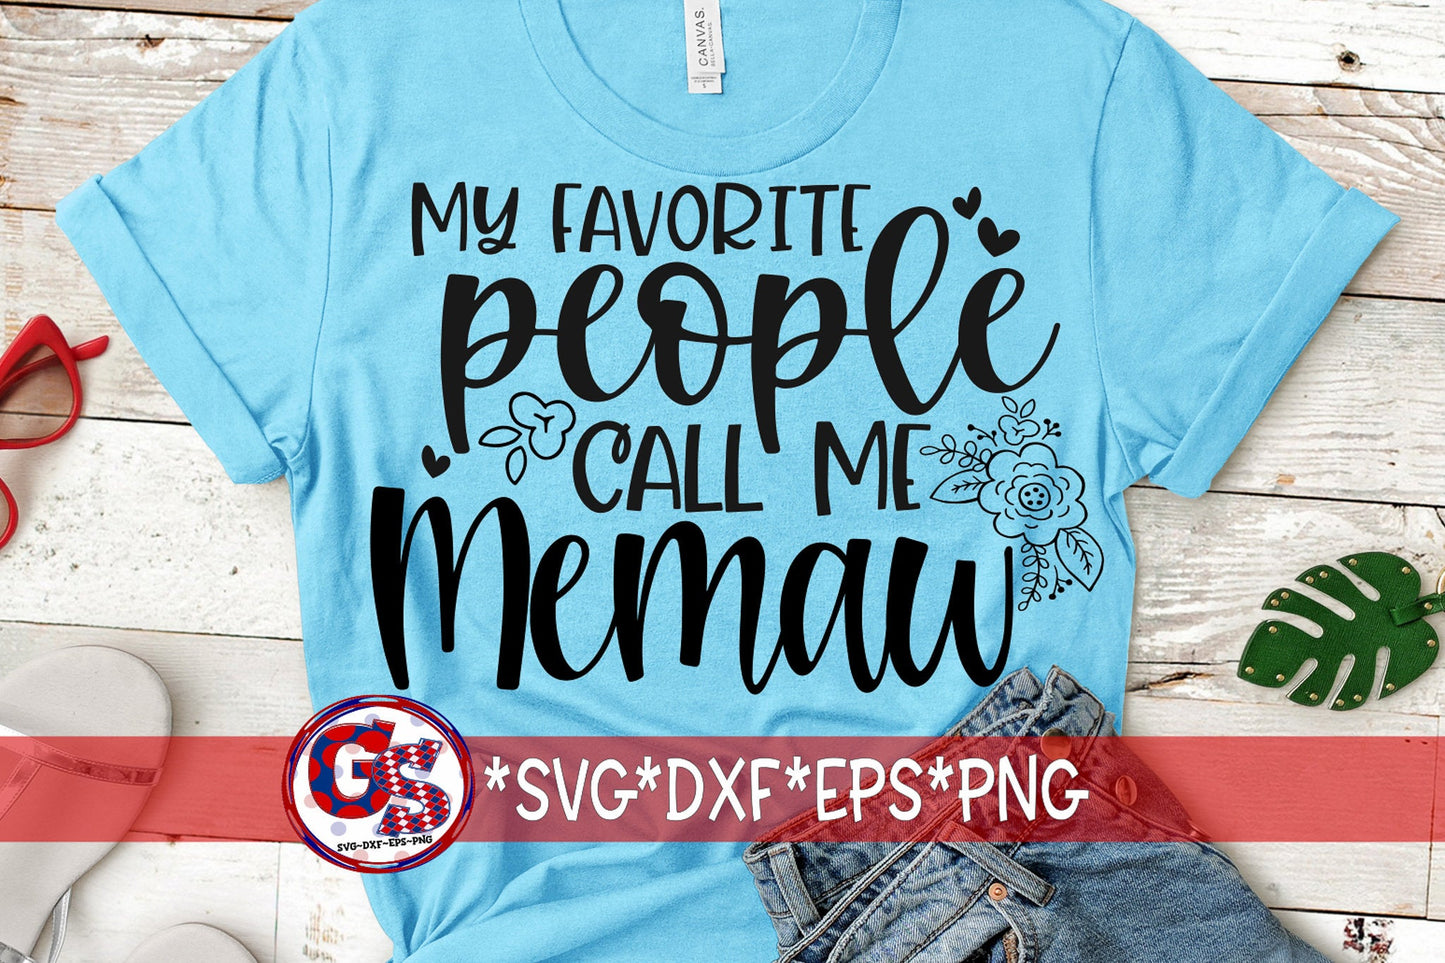 My Favorite People Call Me Memaw svg dxf eps png | Mother&#39;s Day SVG | Memaw SVG | Memaw DxF | Call Me Memaw svg | Instant Download Cut File.